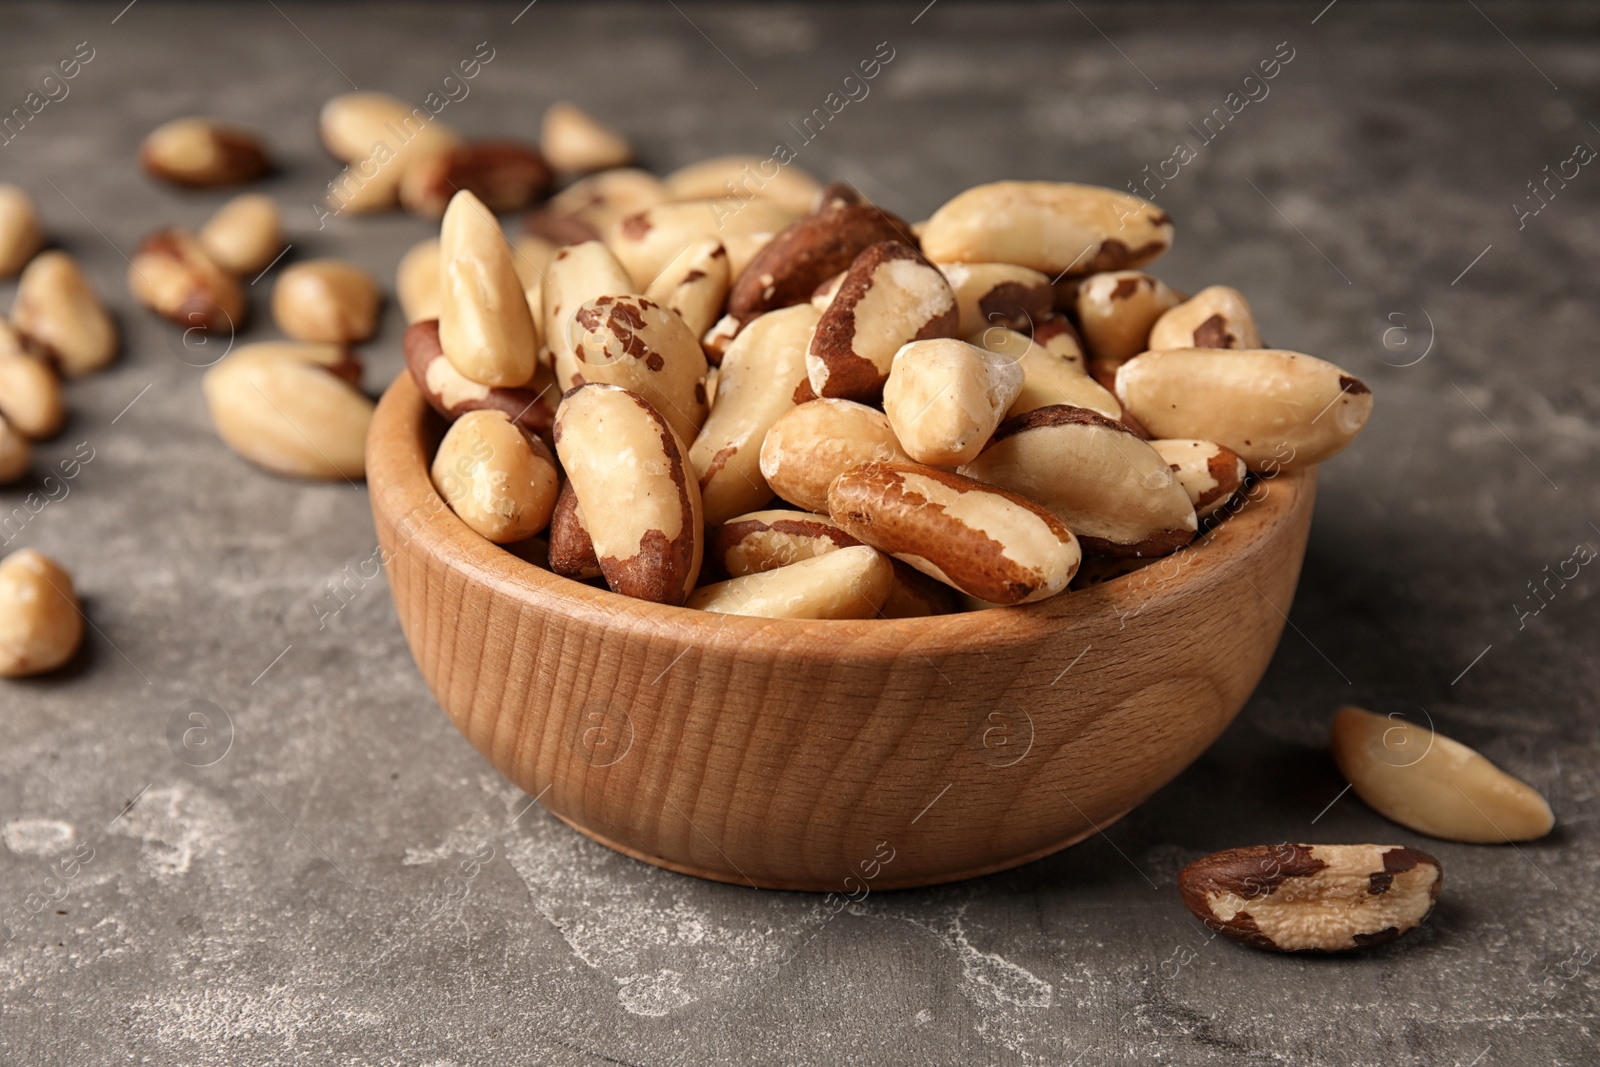 Photo of Bowl with tasty Brazil nuts on grey table